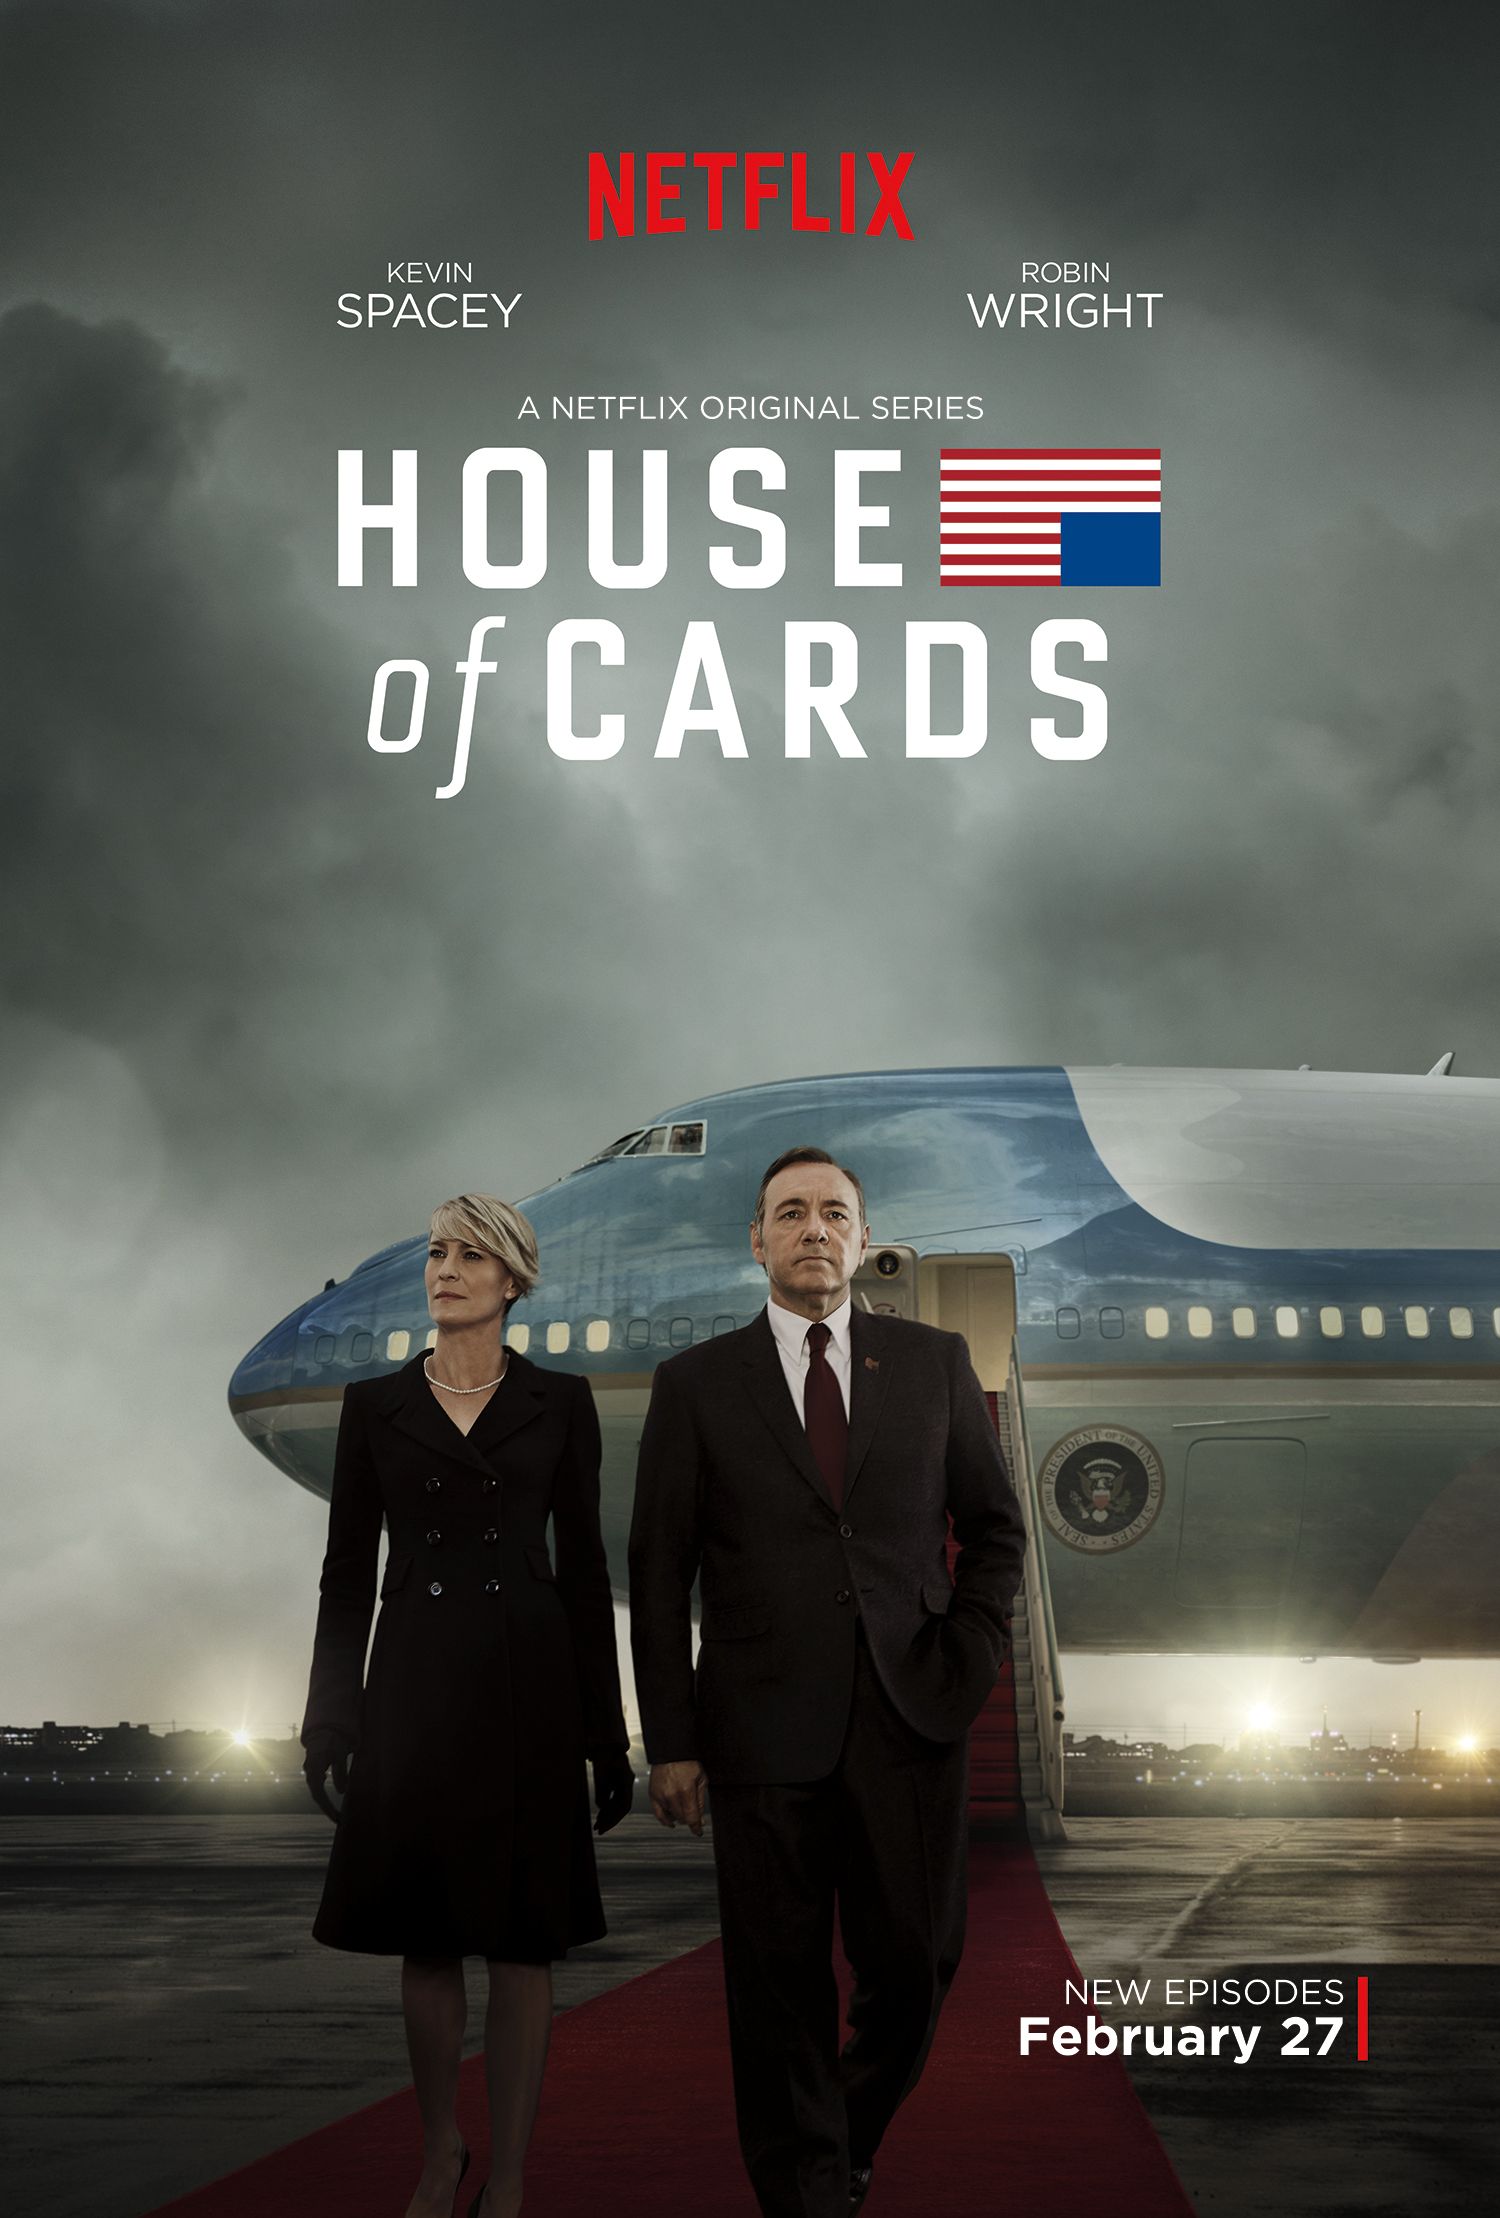 Nuance house of cards nuance cloud connector tuto